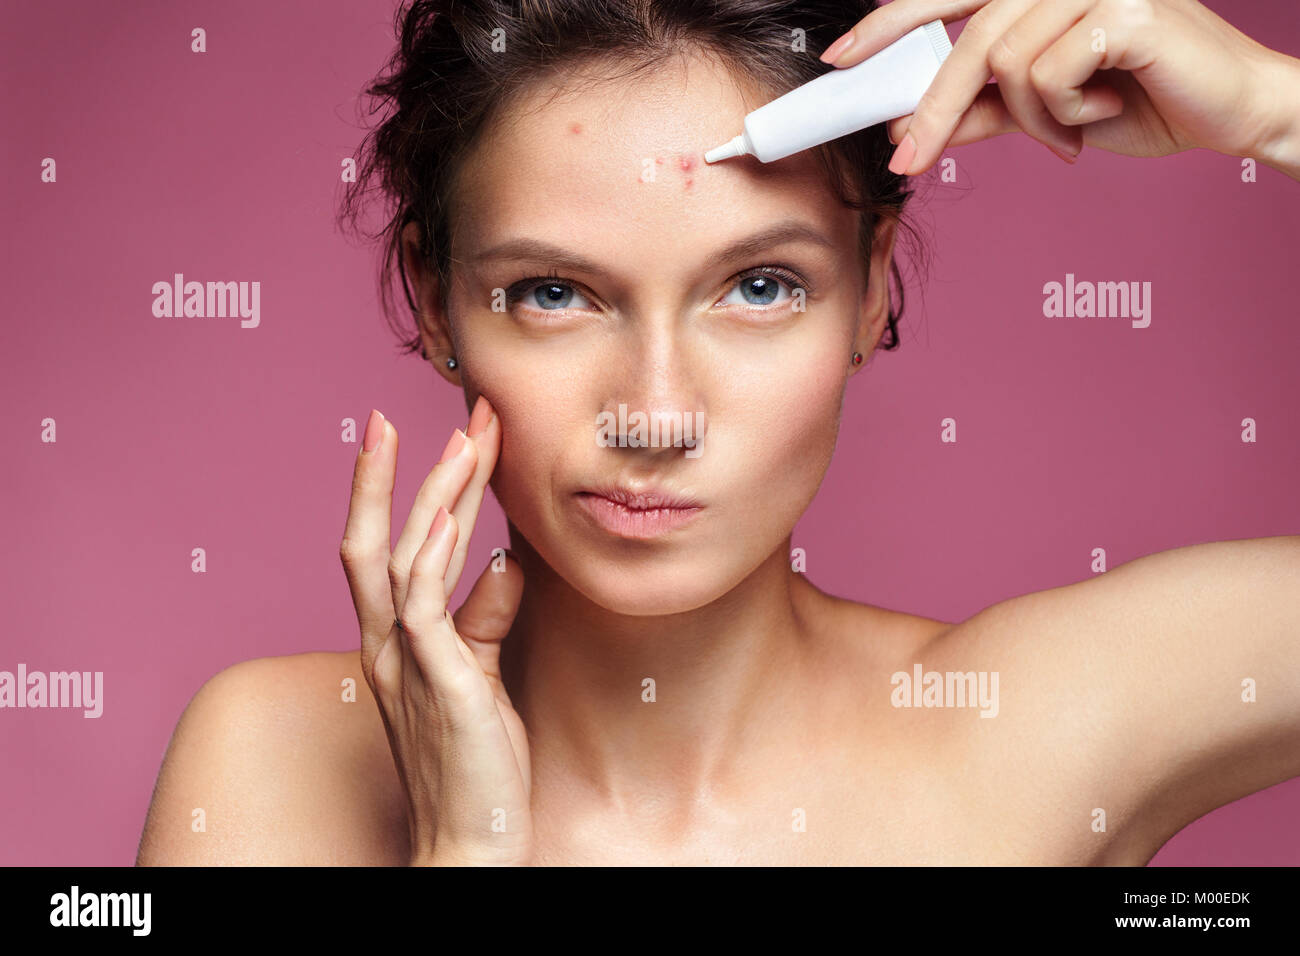 Scowling girl pointing at her acne and appling treatment cream. Photo of young girl with problem skin on pink background. Skin care concept Stock Photo